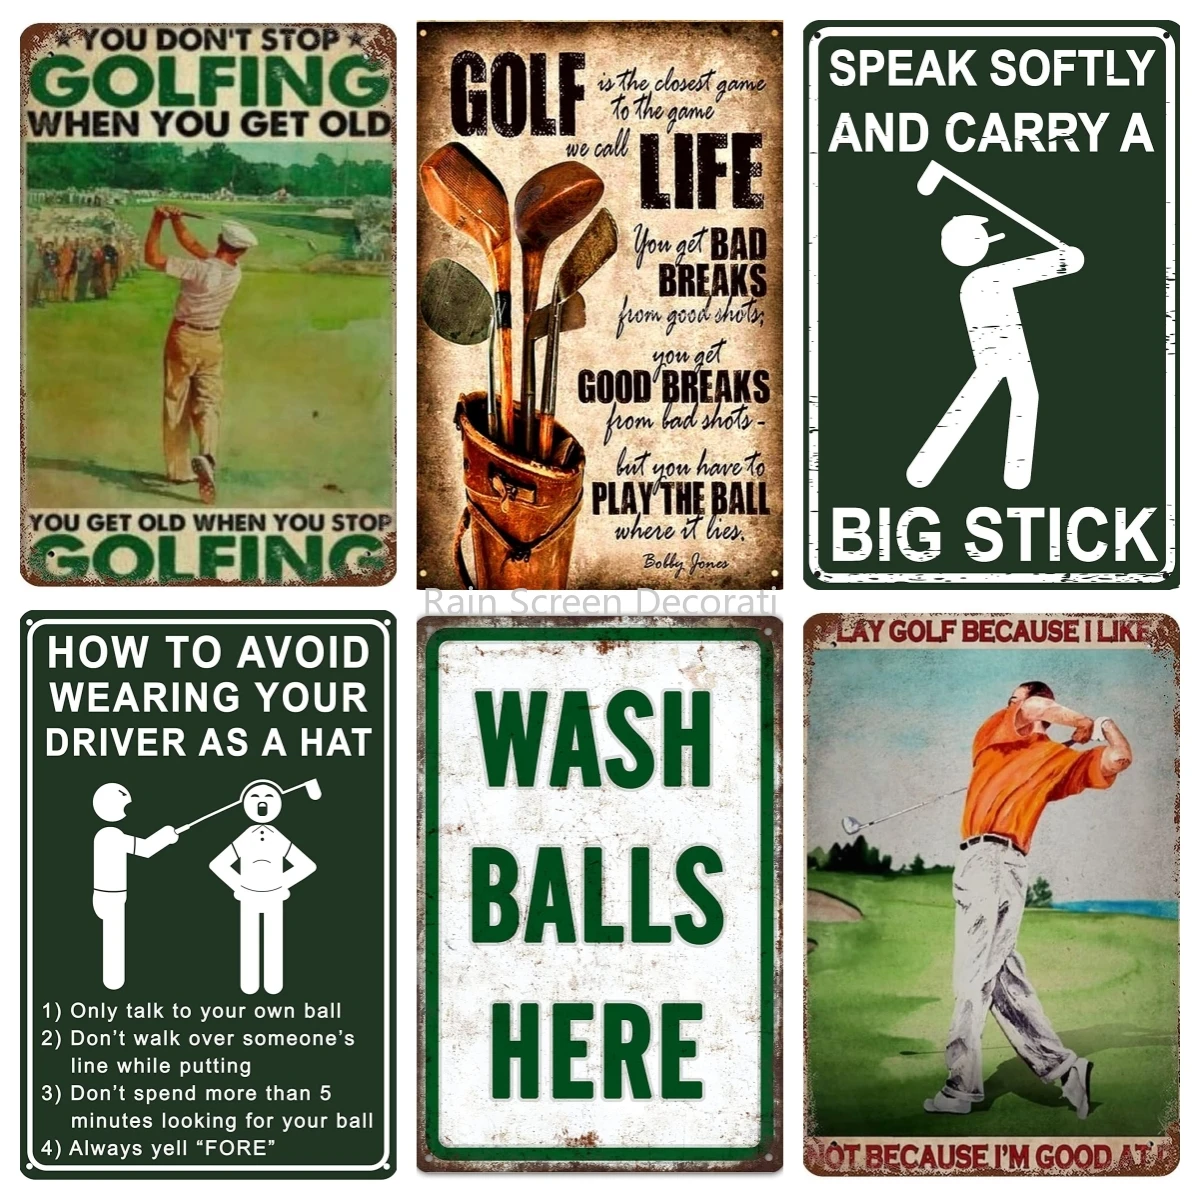 

Wash Balls Here Vintage Metal Funny Gift Golf Tin Signs Man Cave Sports Golfer, Country, Golf Club 12 x 8 Inches Wall Decoration